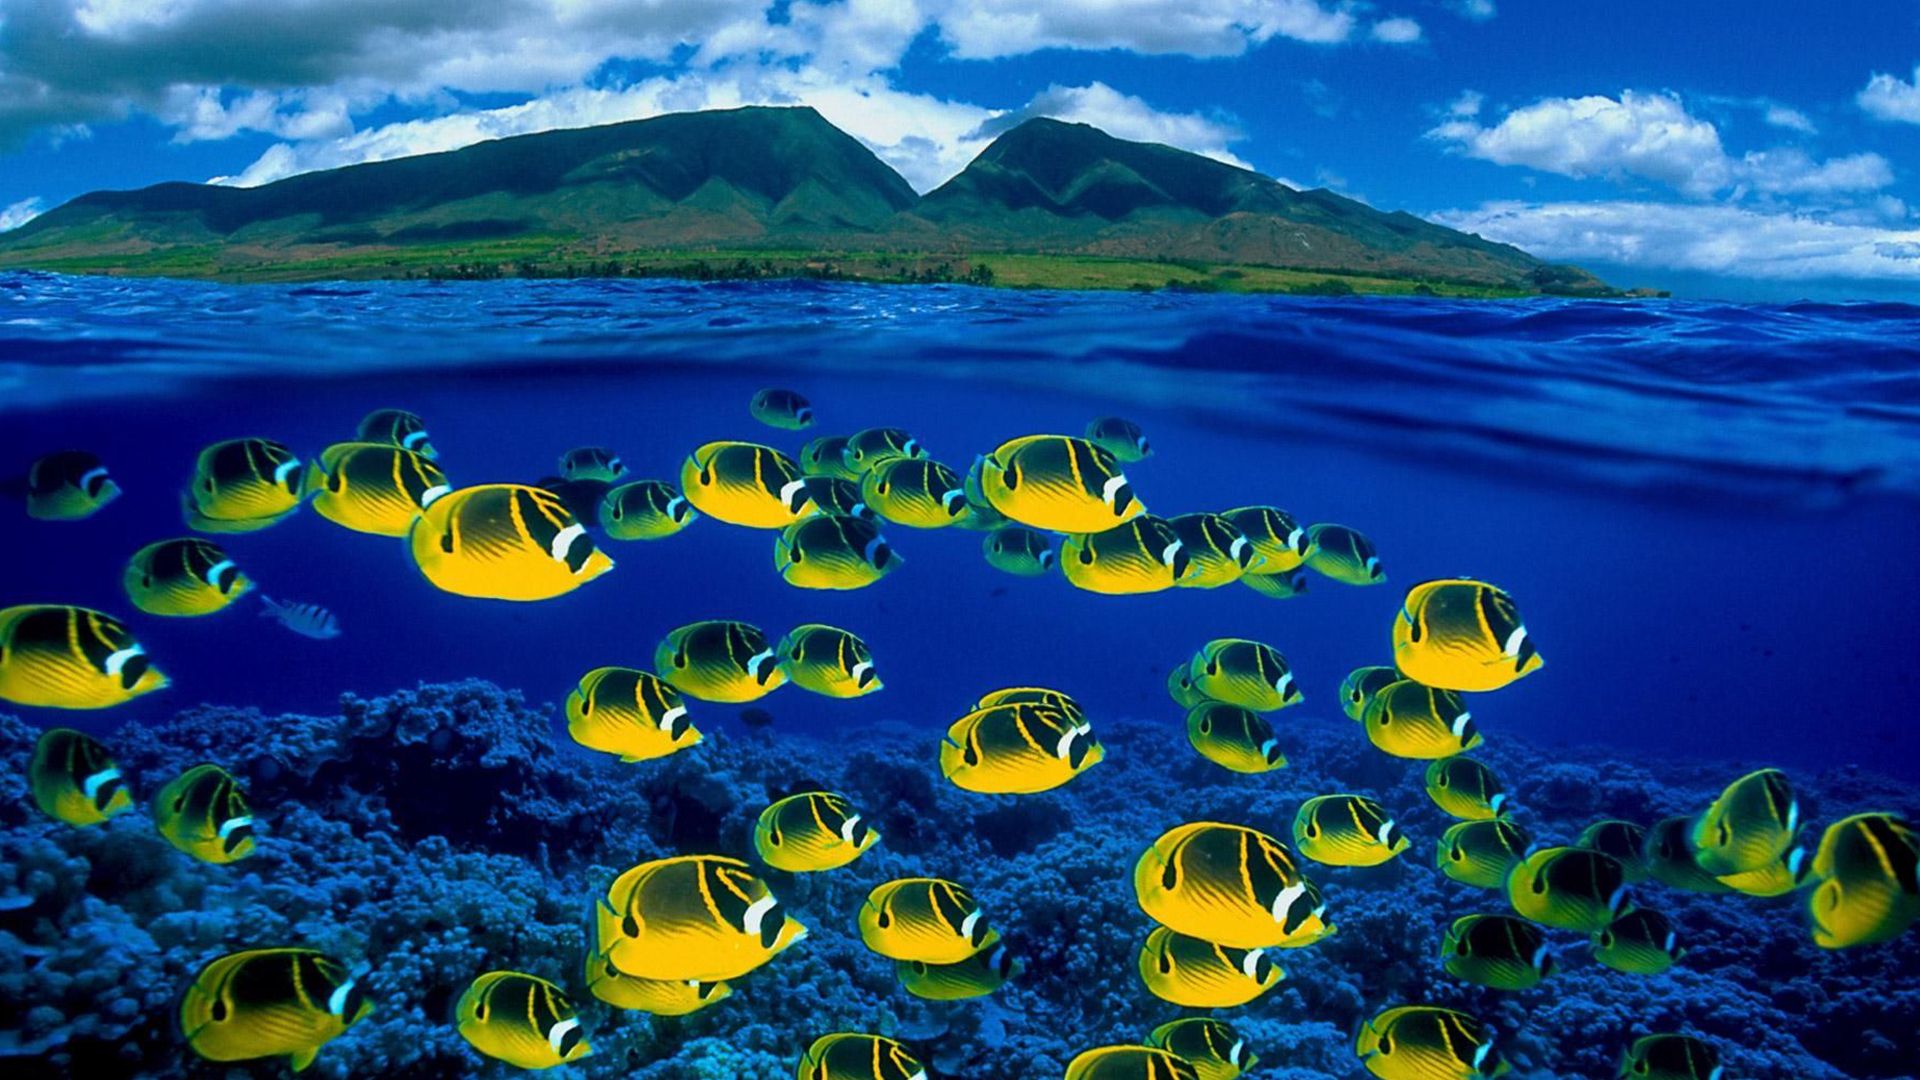 Shoaling Of Yellow Fishes Underwater And Landscape View Of Mountains In White Clouds Blue Sky Wallpaper HD Bing